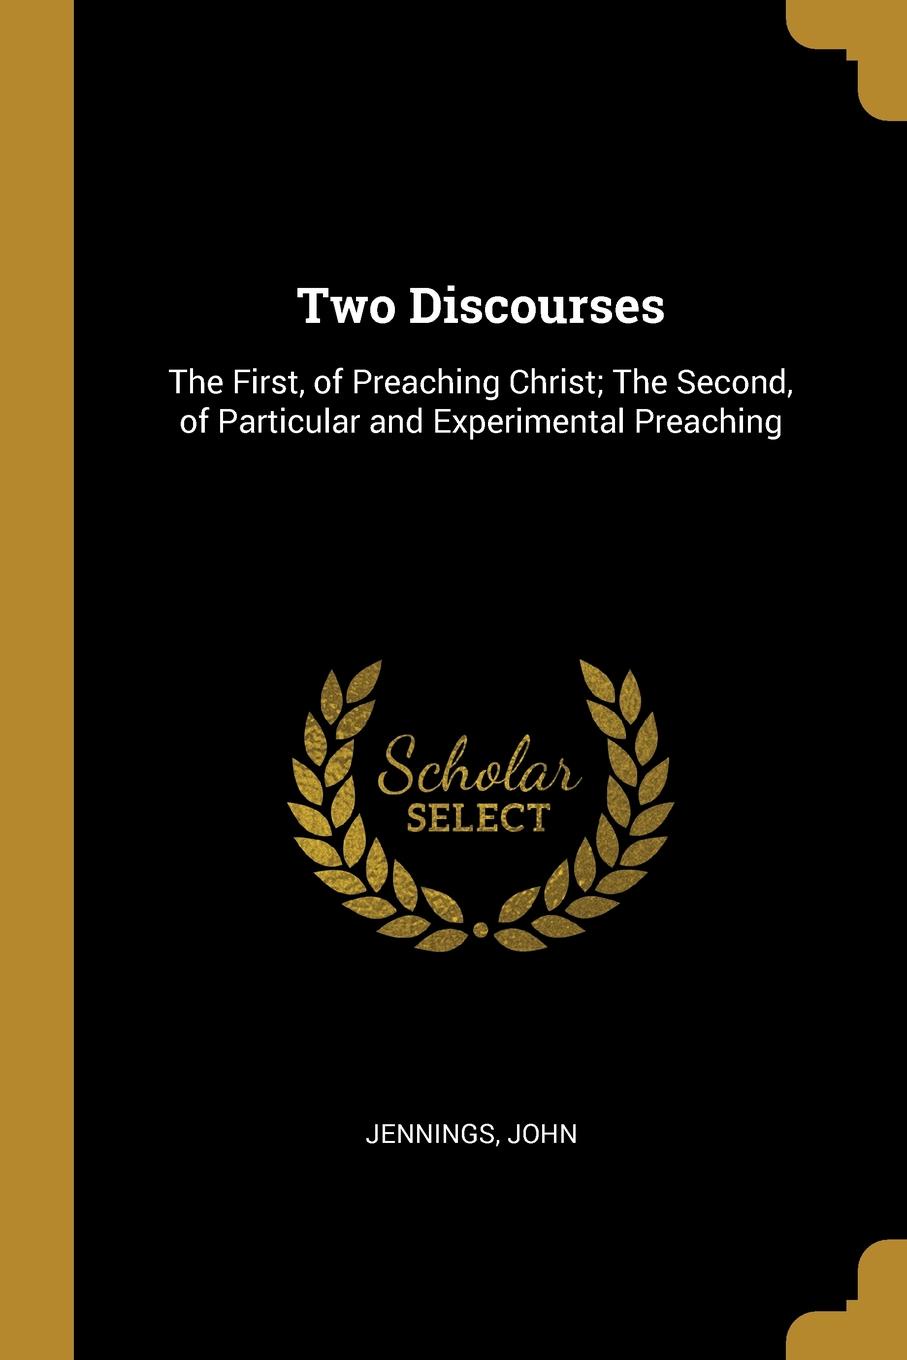 Two Discourses. The First, of Preaching Christ; The Second, of Particular and Experimental Preaching